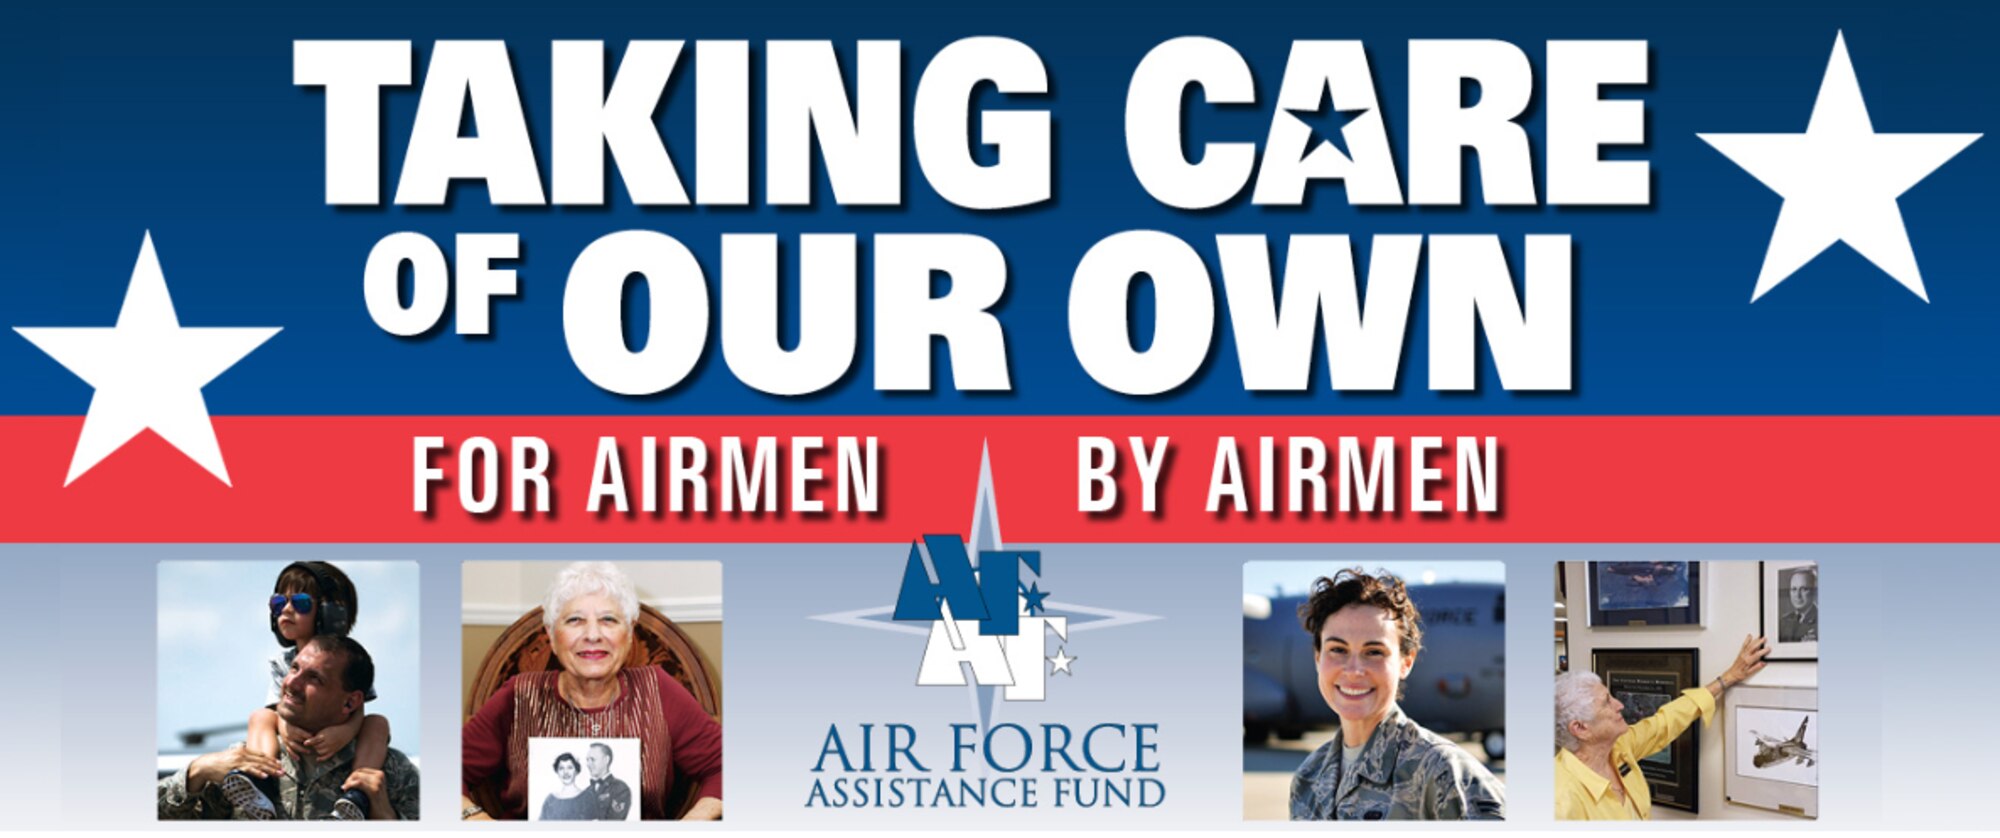 The Air force Assistance Fund offers an opportunity for Airmen to support their wingmen in need via one-time or recurring donation.